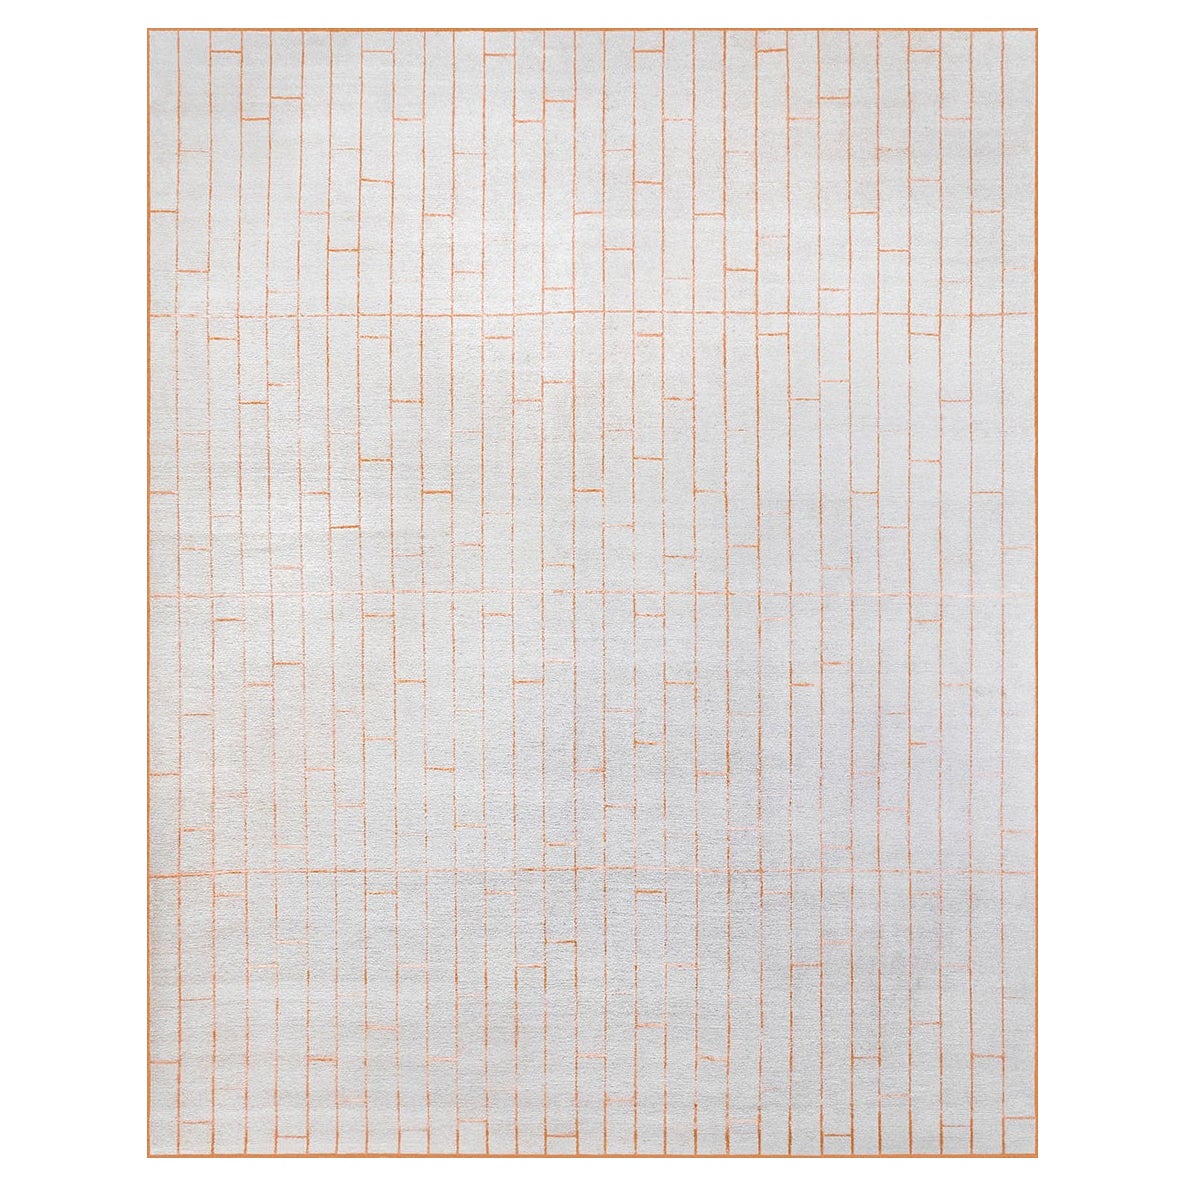 "Foundation - Blush + Taupe" /  9' x 12' / Hand-Knotted Wool + Silk Rug For Sale